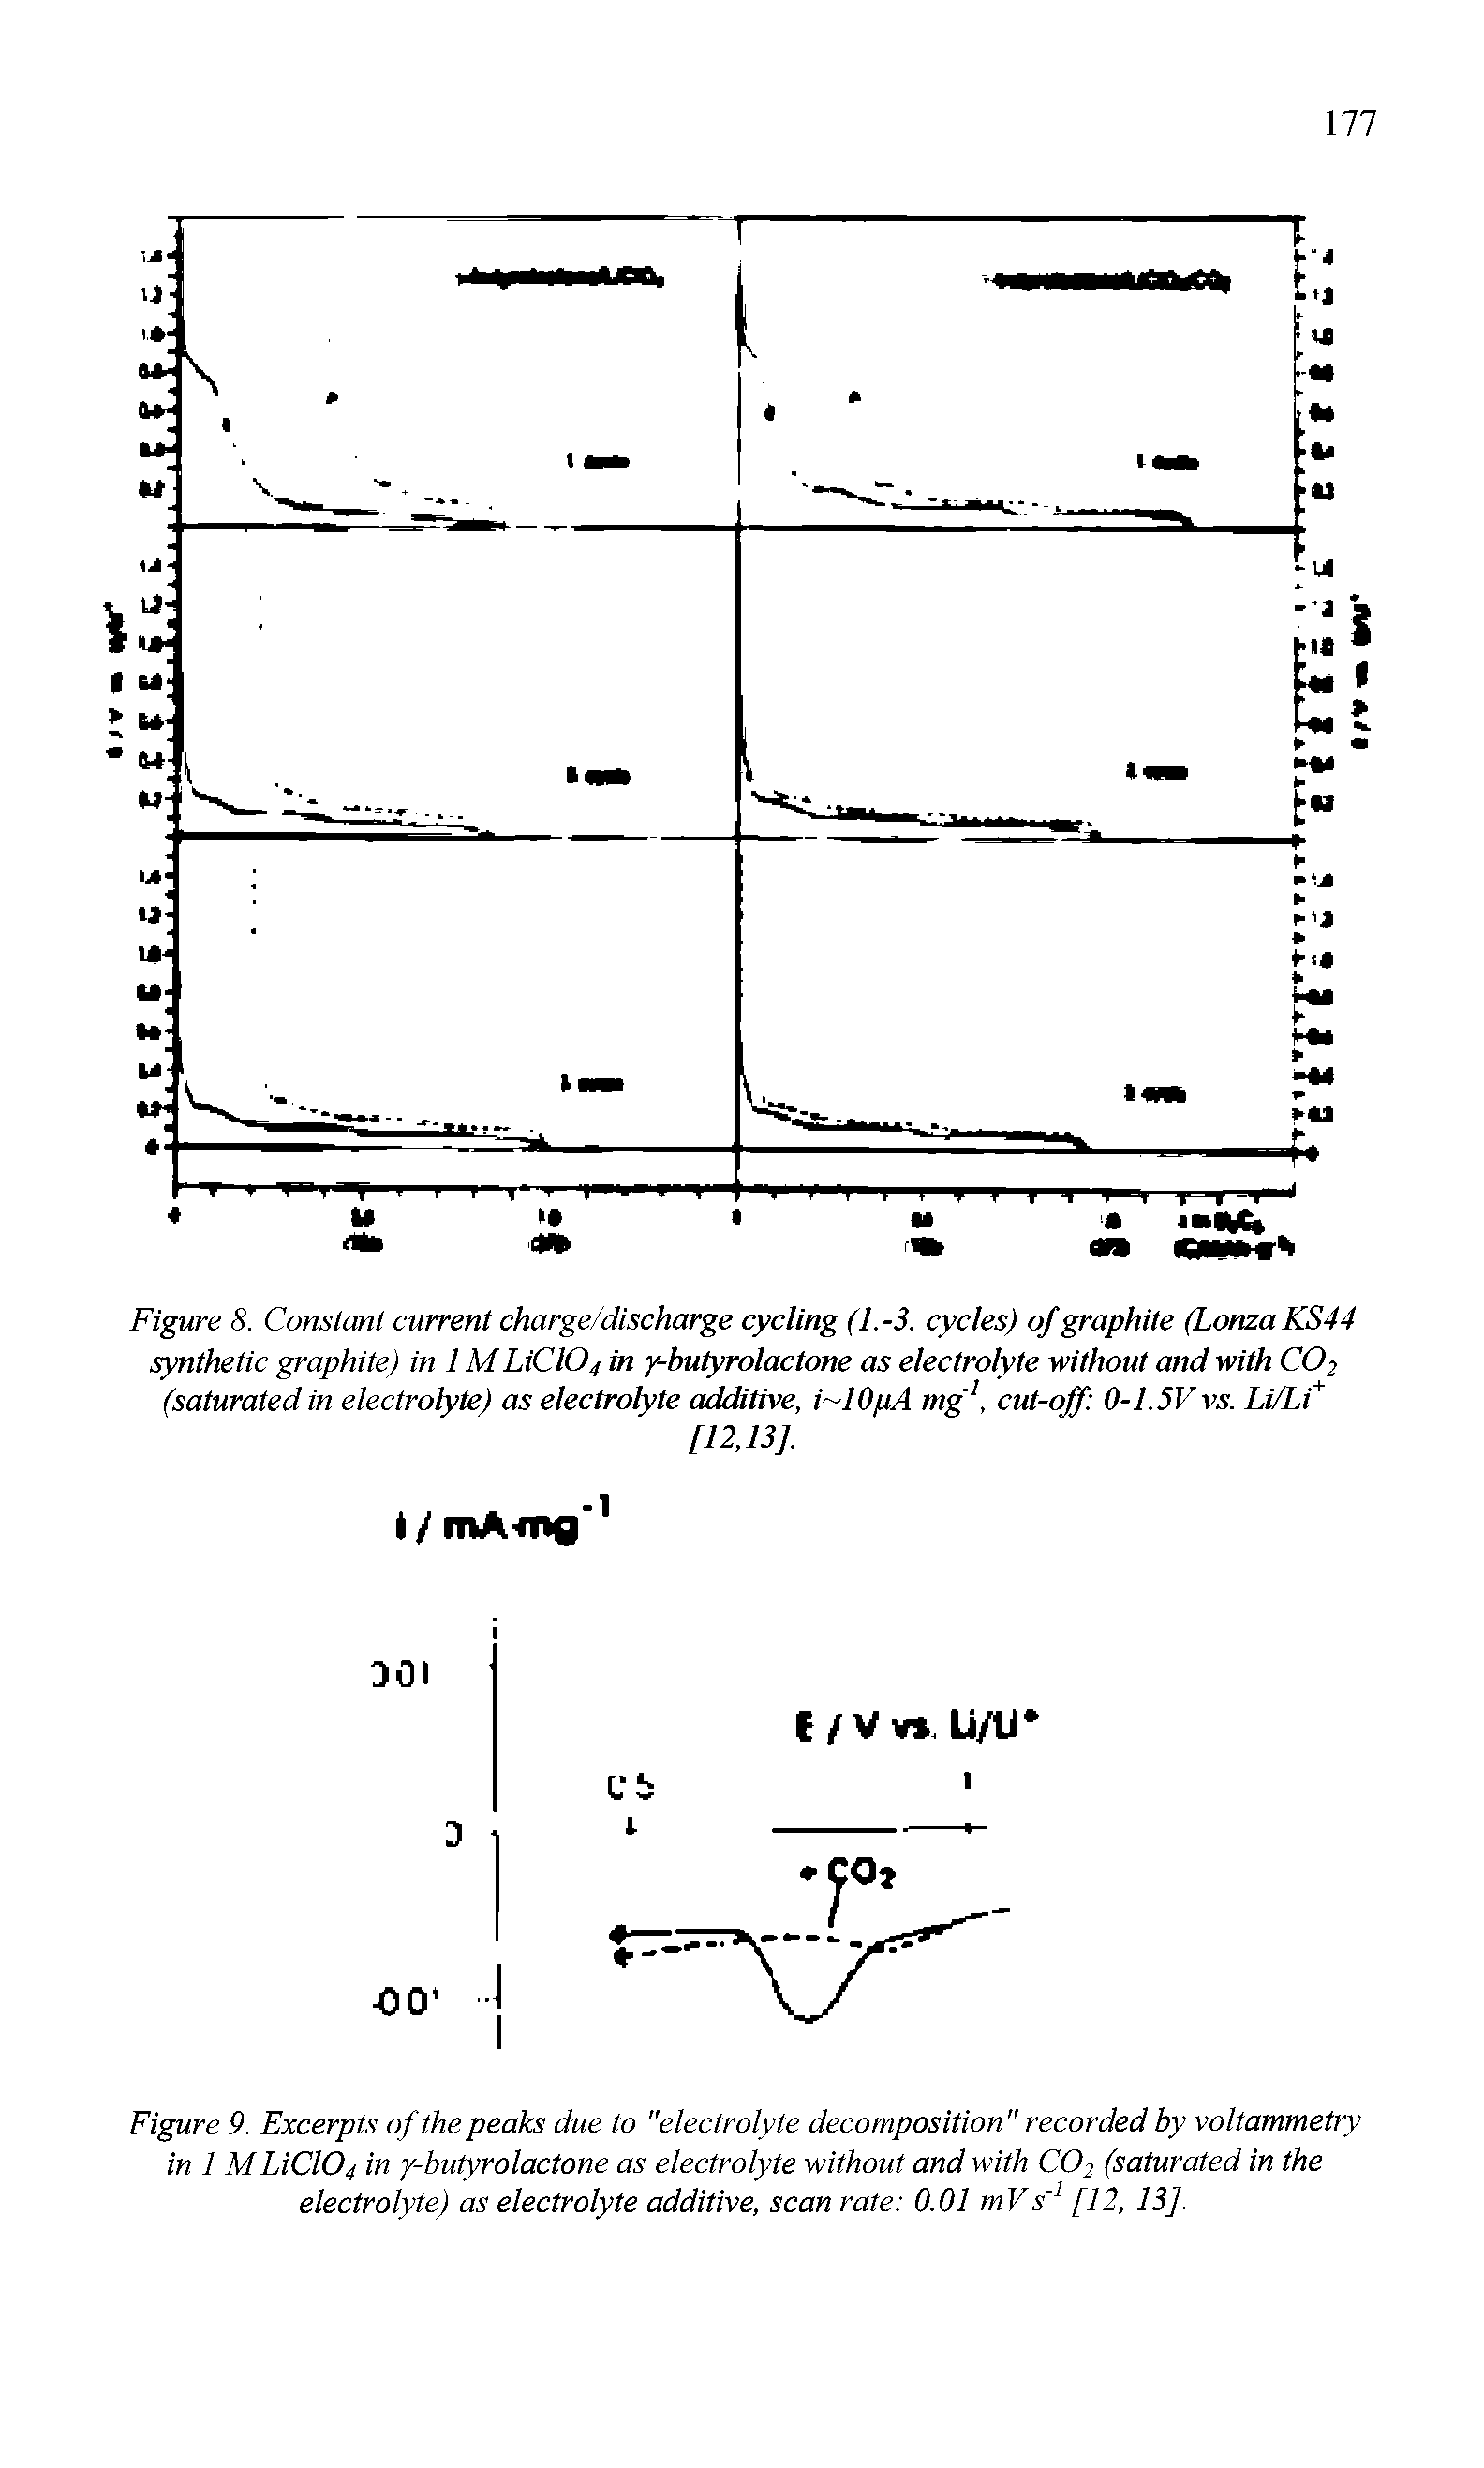 Figure 8. Constant current charge/discharge cycling (1.-3. cycles) of graphite (Lonza KS44 synthetic graphite) in 1 MLiCl04 in y-hutyrolactone as electrolyte without and with C02 (saturated in electrolyte) as electrolyte additive, i lOpA mg 1, cut-off 0-1.5V vs. Li/Li+...